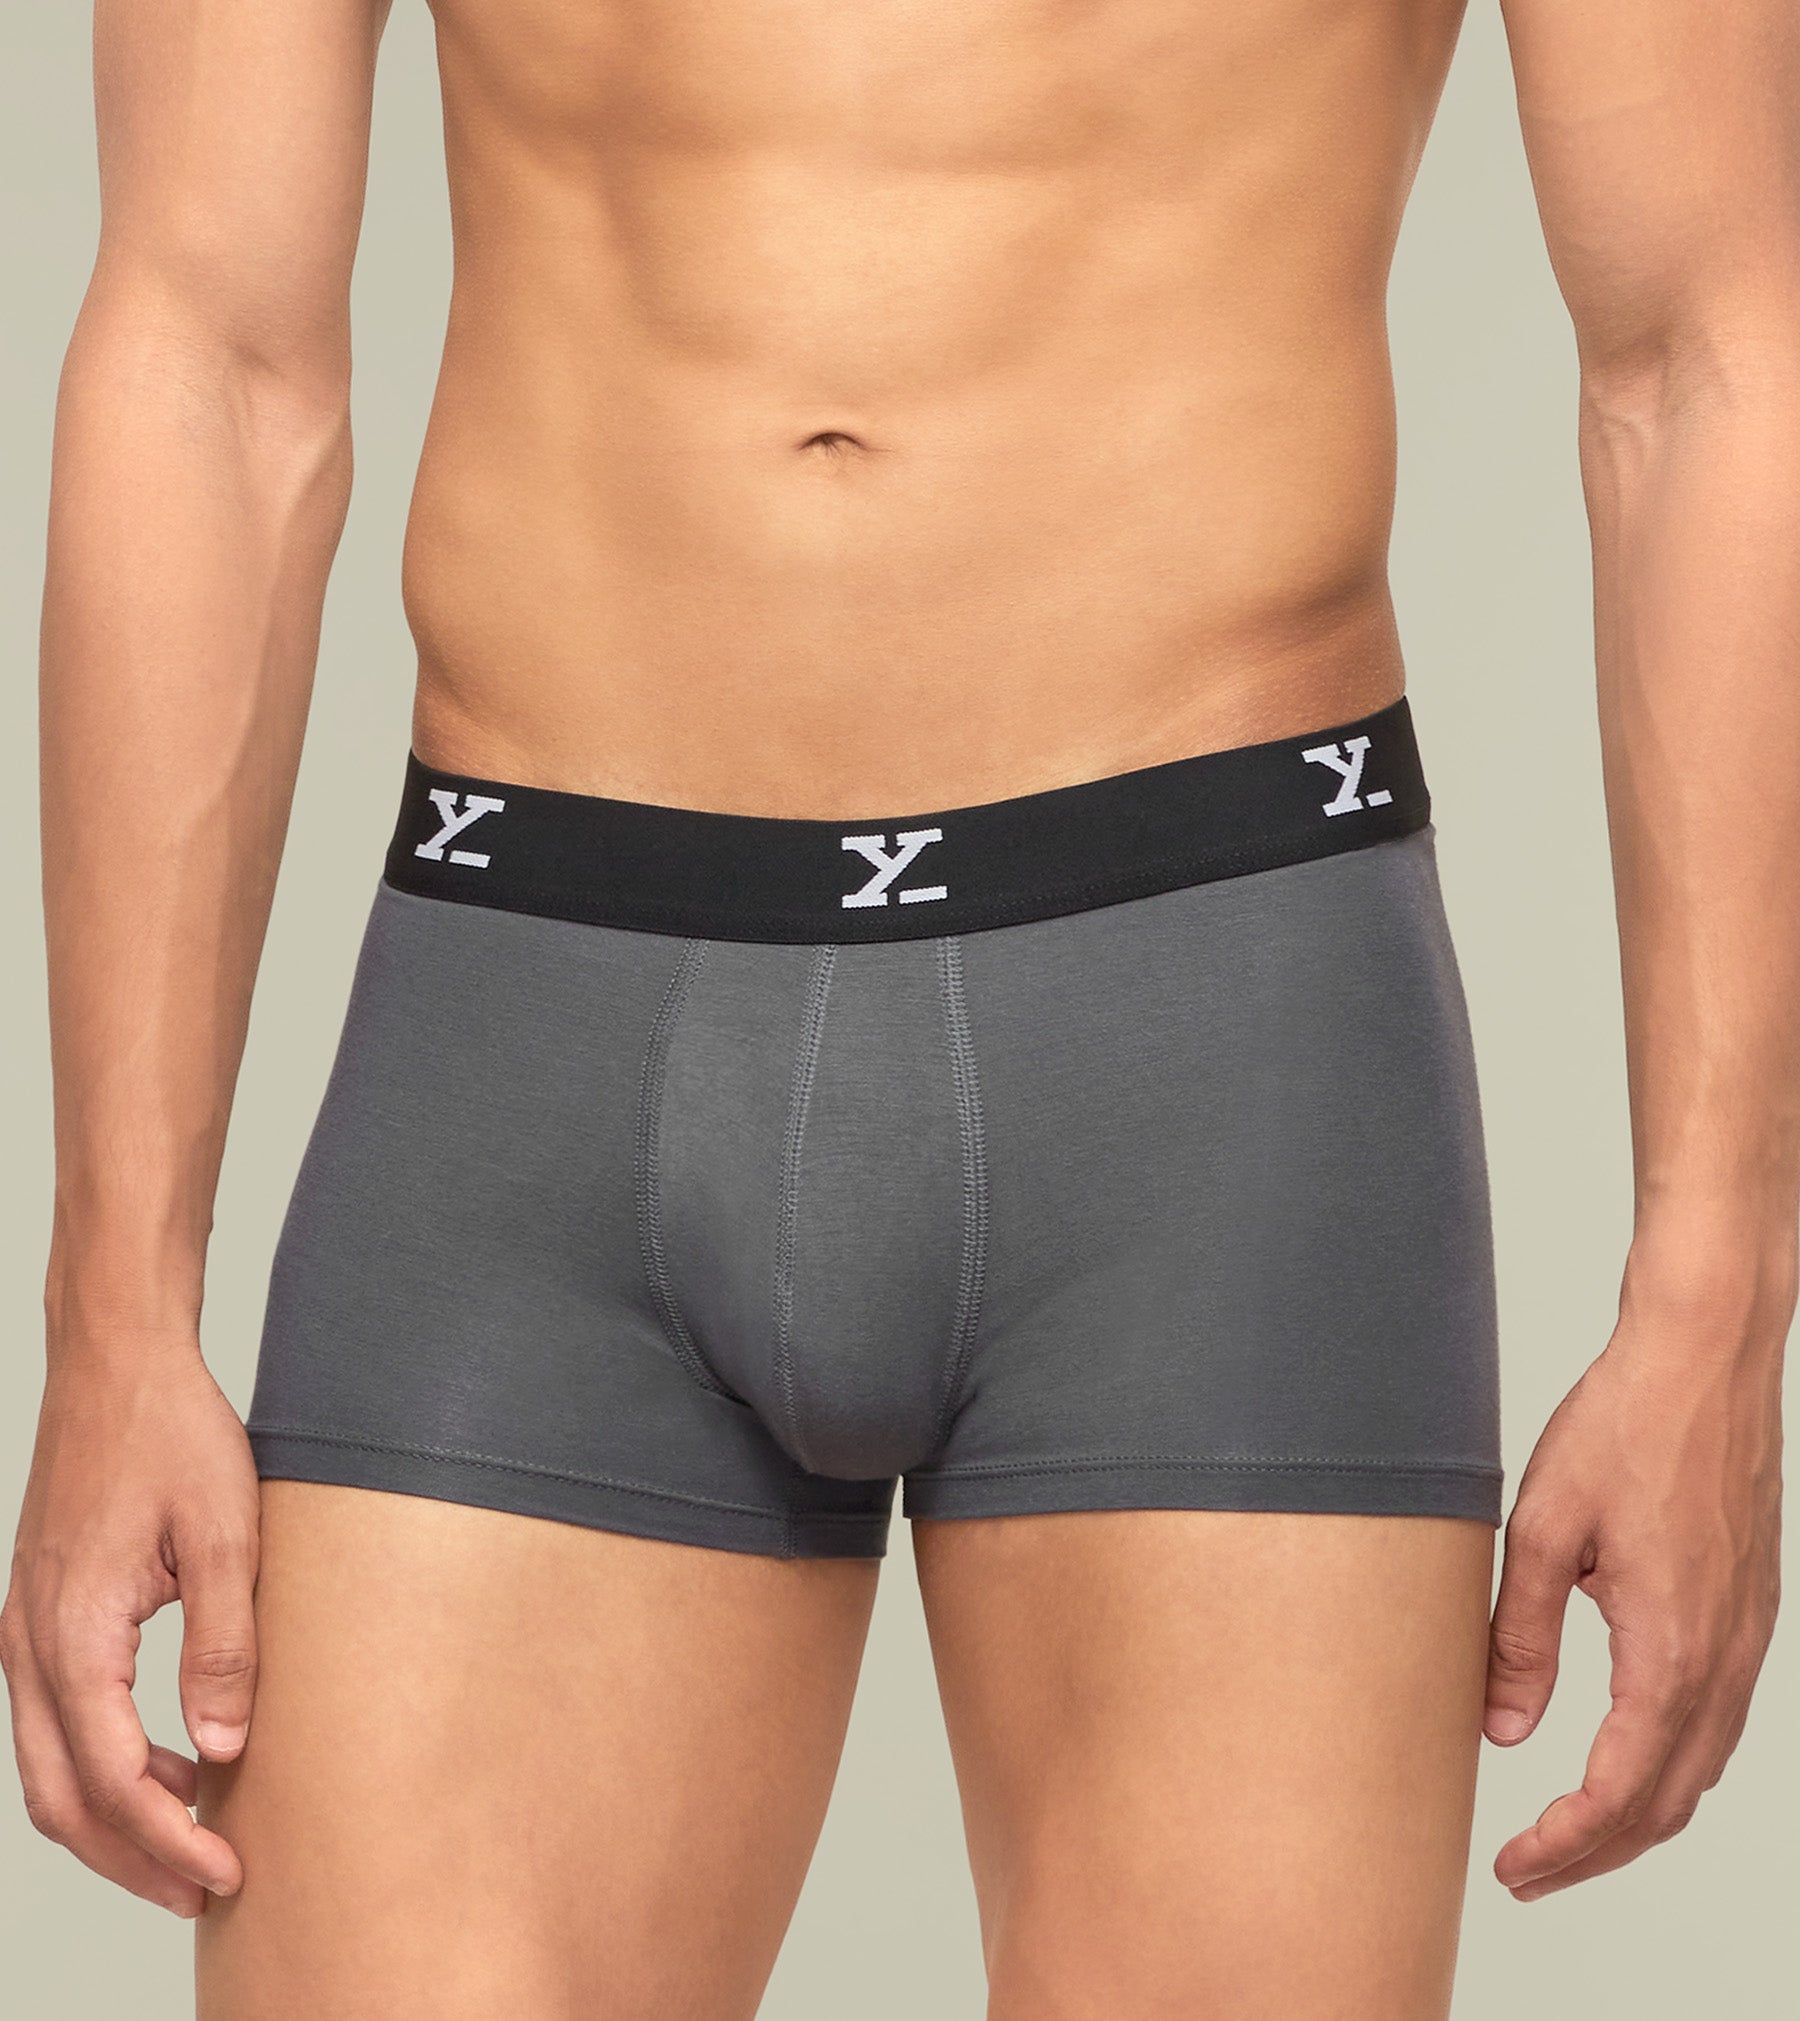 Ace Modal Trunks For Men Charcoal Grey -  XYXX Mens Apparels